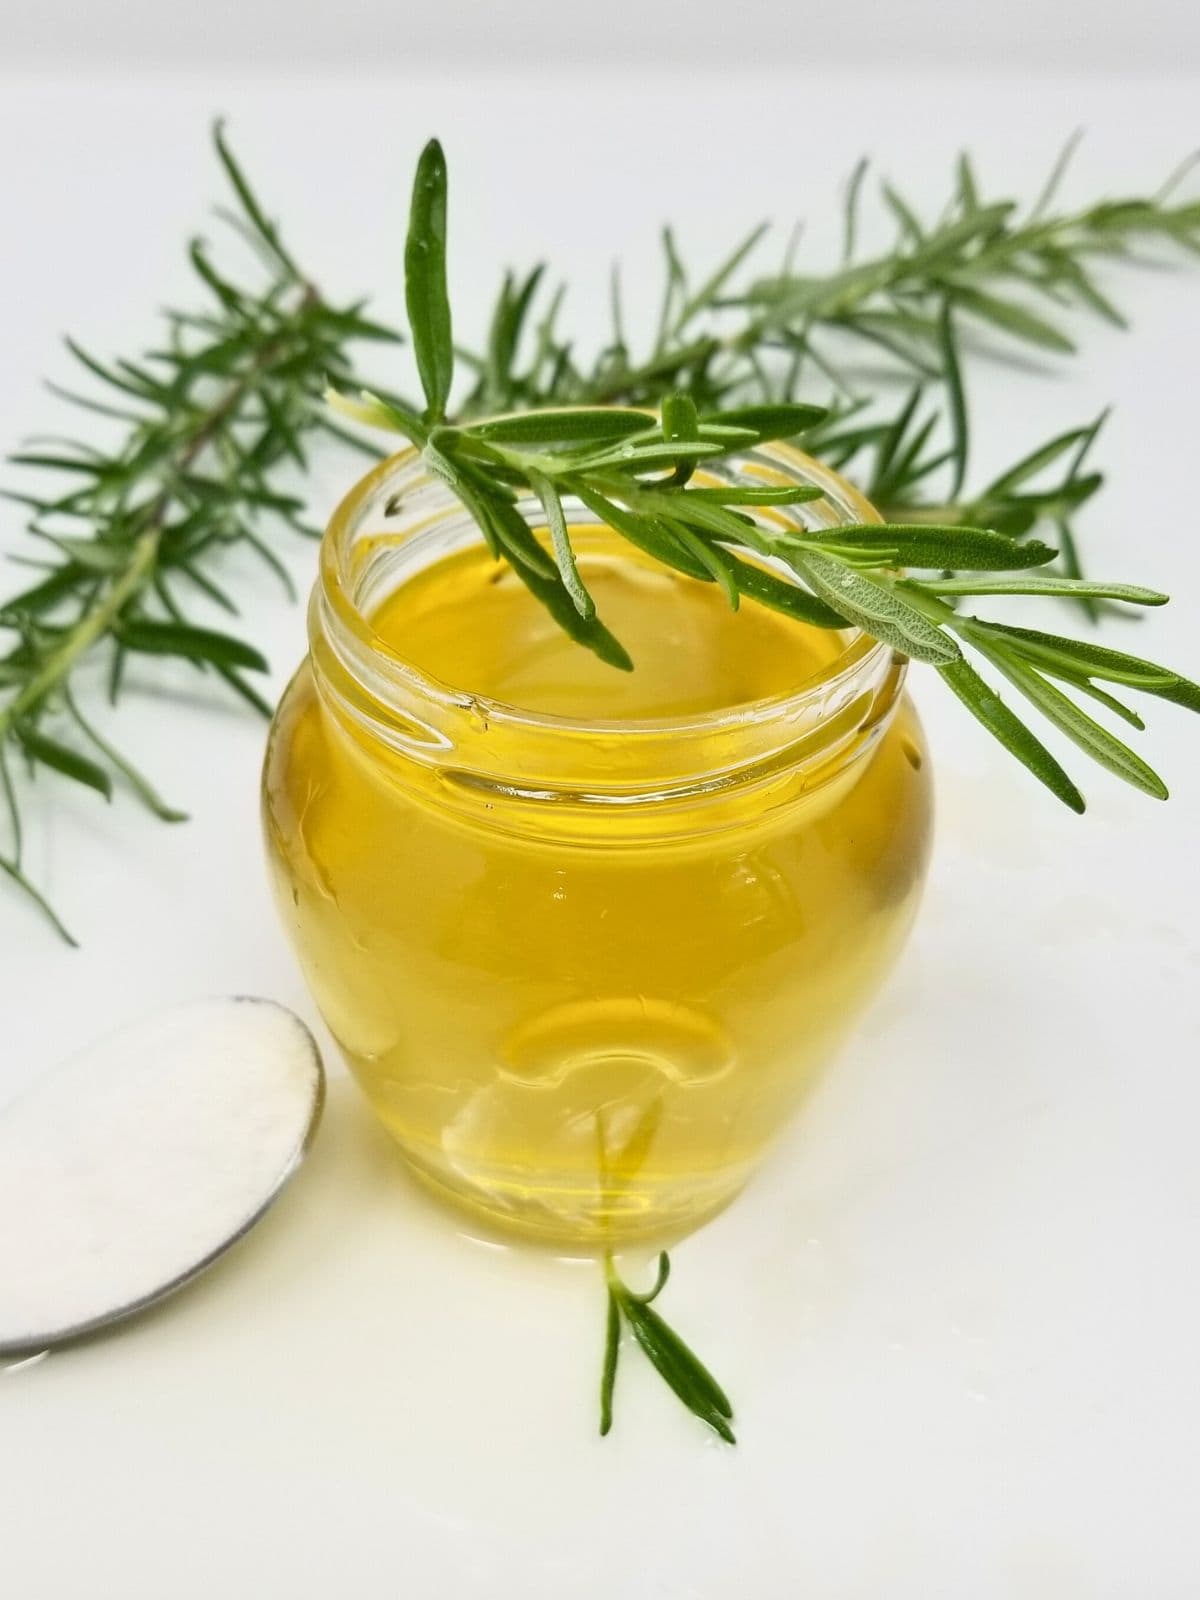 rosemary simple syrup in a glass container.